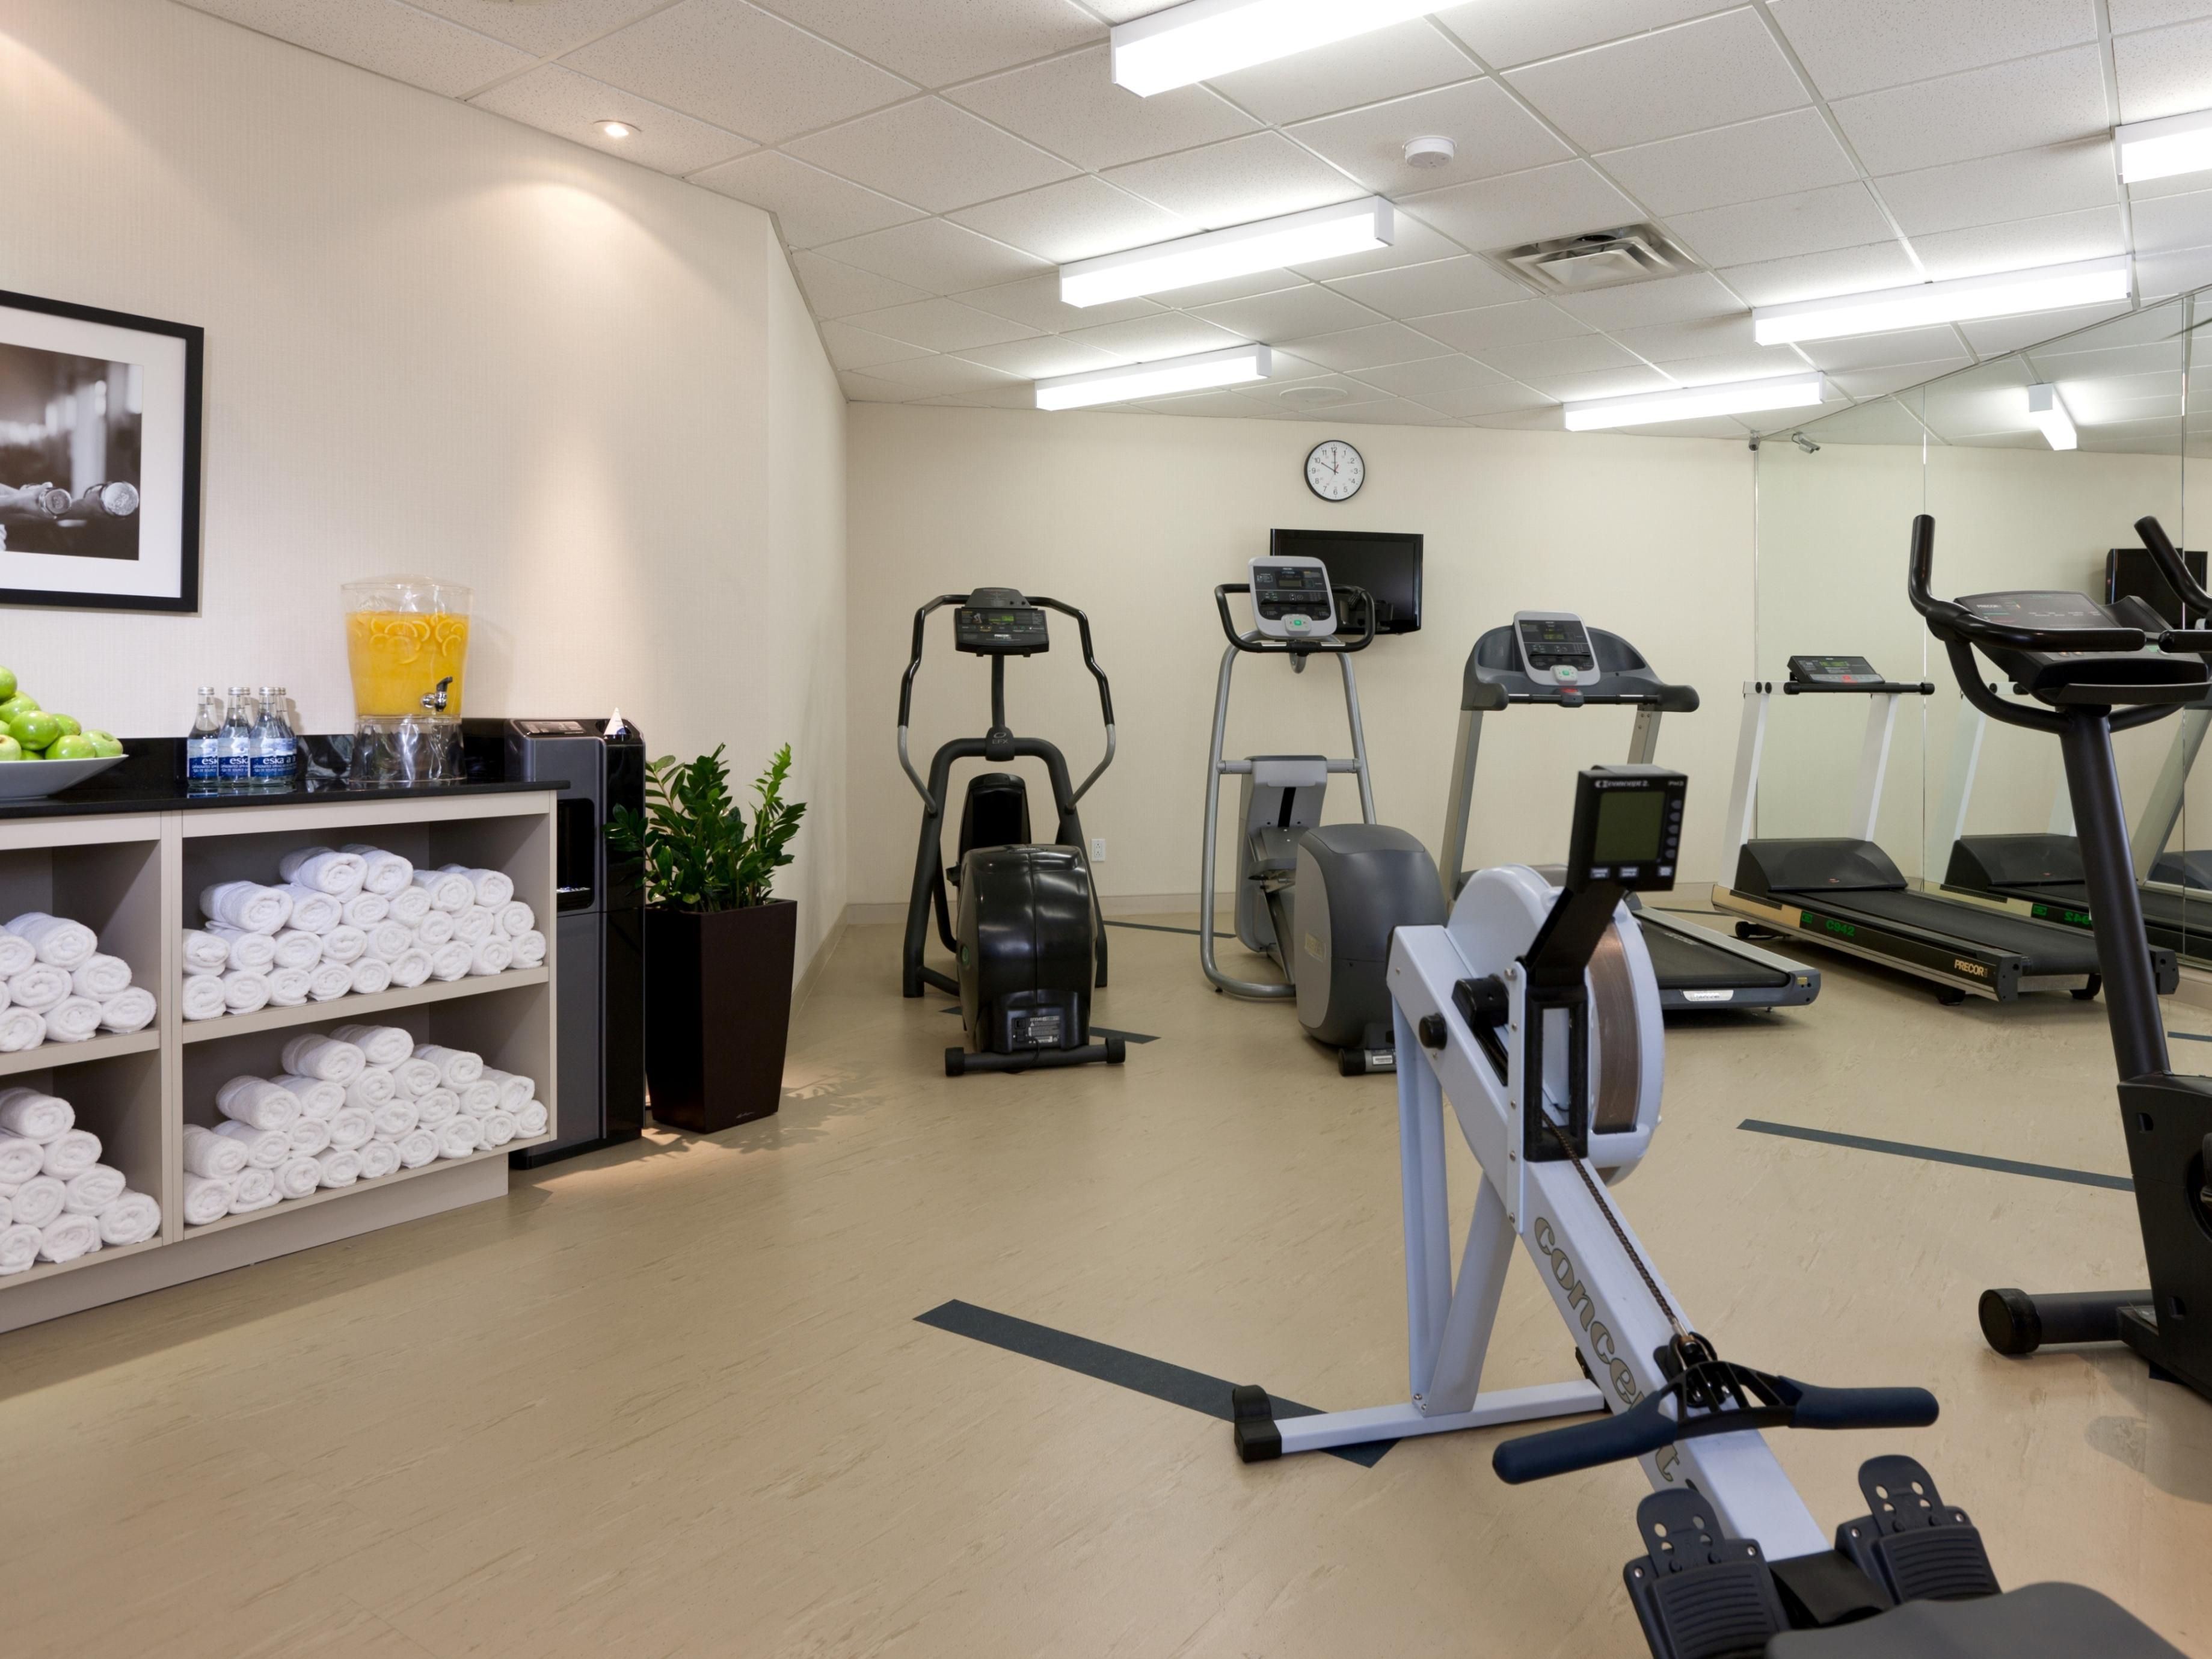 Enjoy the benefits of our exercise room and our indoor pool to relax the body and mind. We look forward to welcoming you soon!